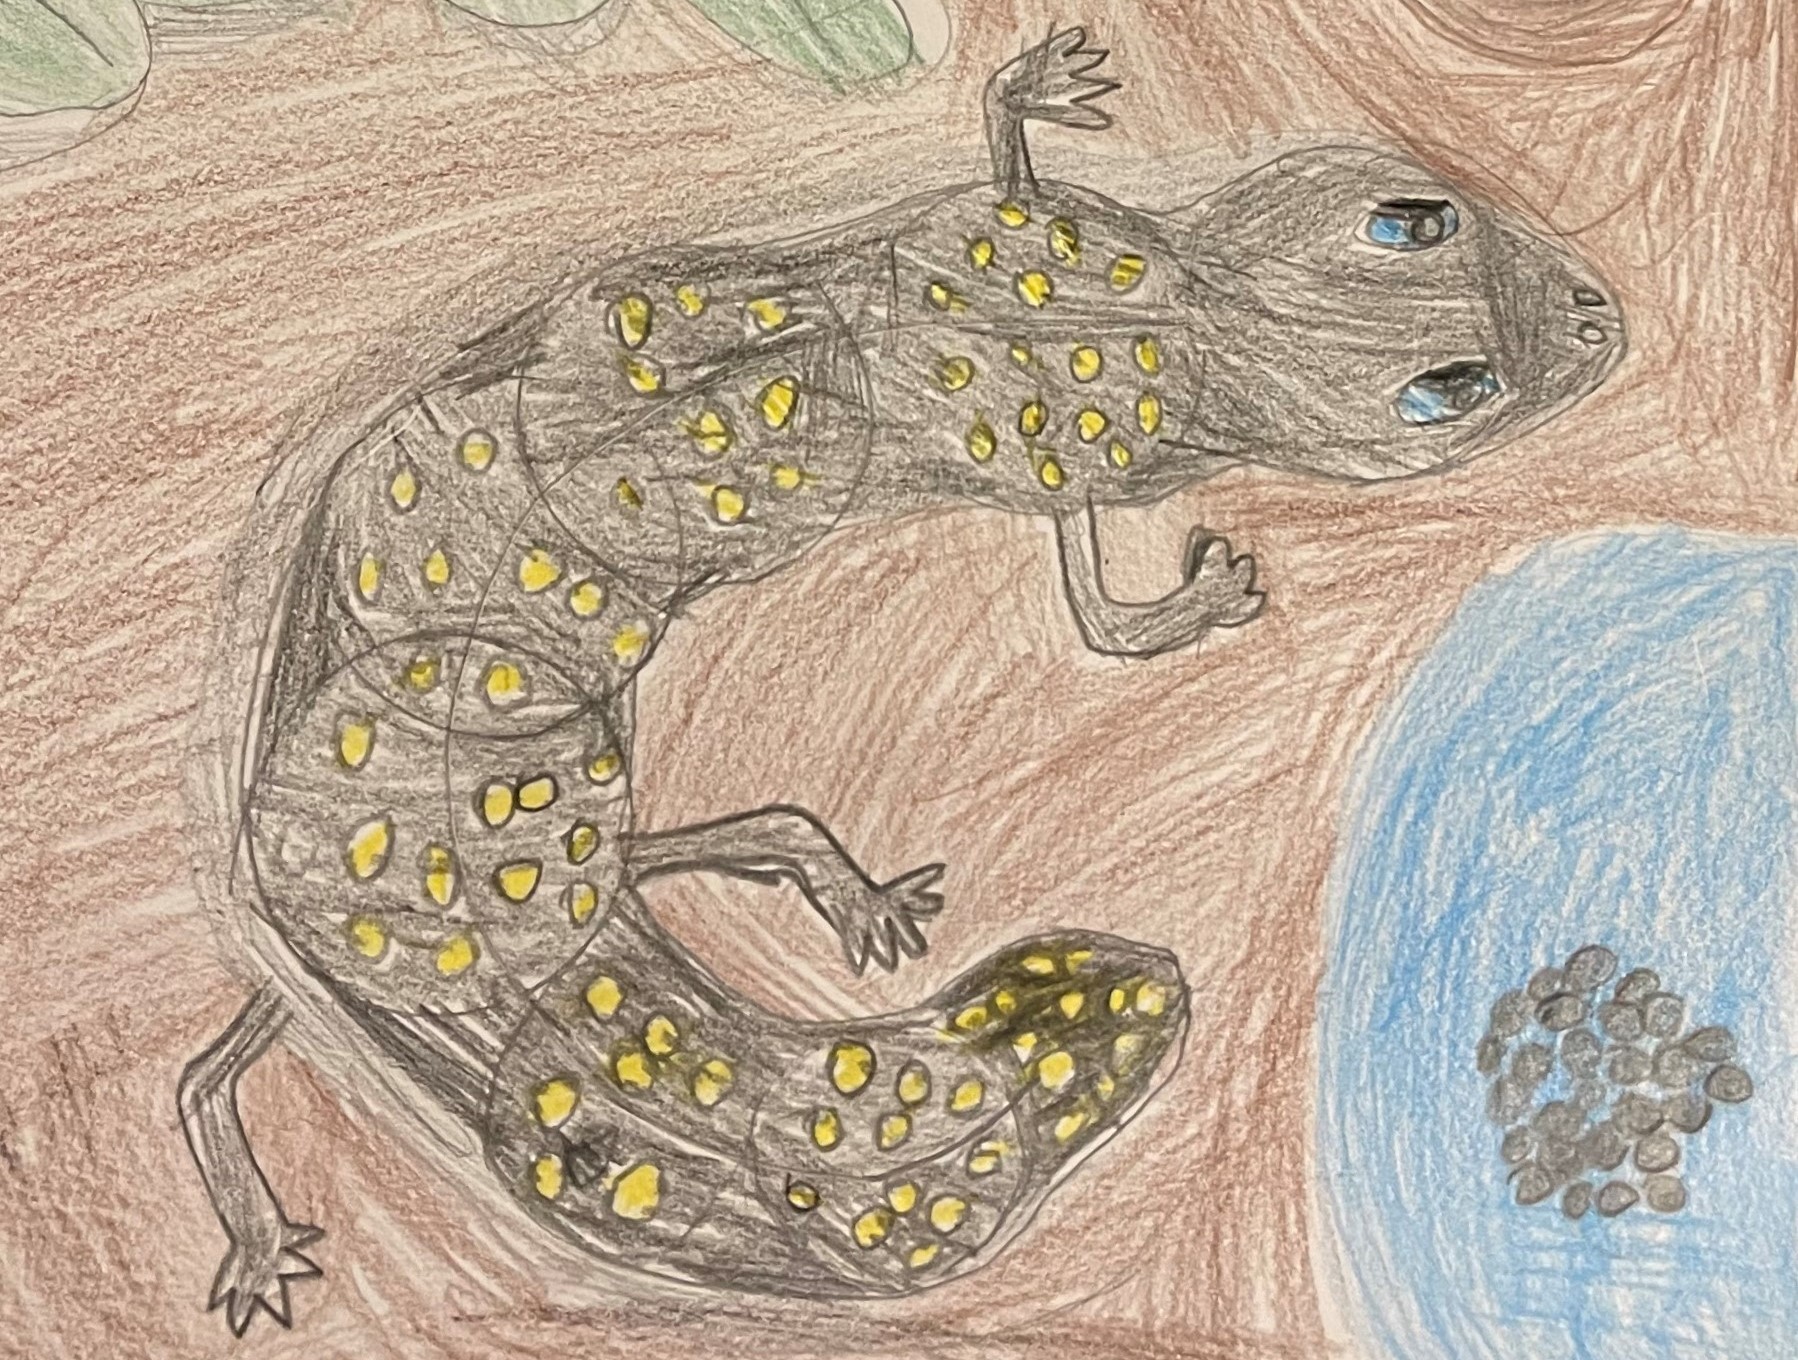 a child's drawing of a lizard from the nature drawing event hosted by the empowerment factory